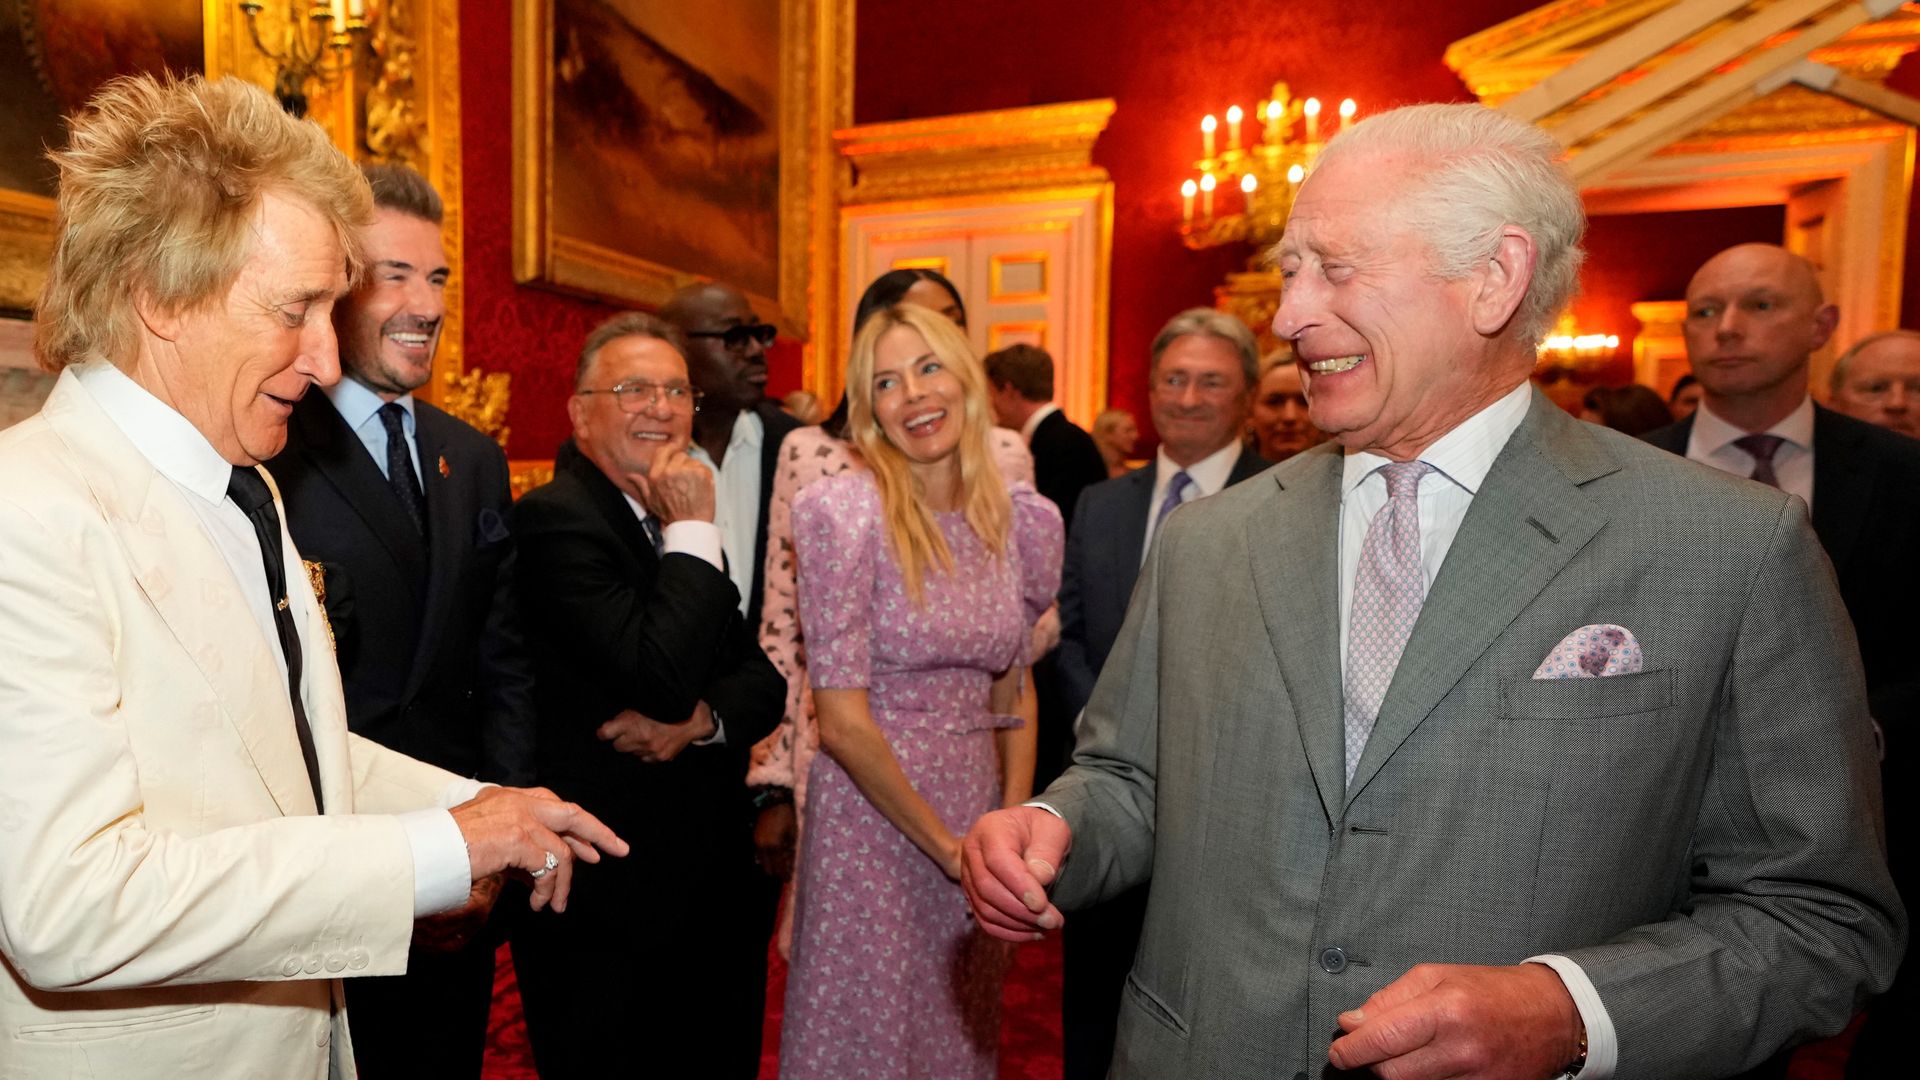 King Charles joined by David Beckham, Sienna Miller and Rod Stewart at star-studded awards